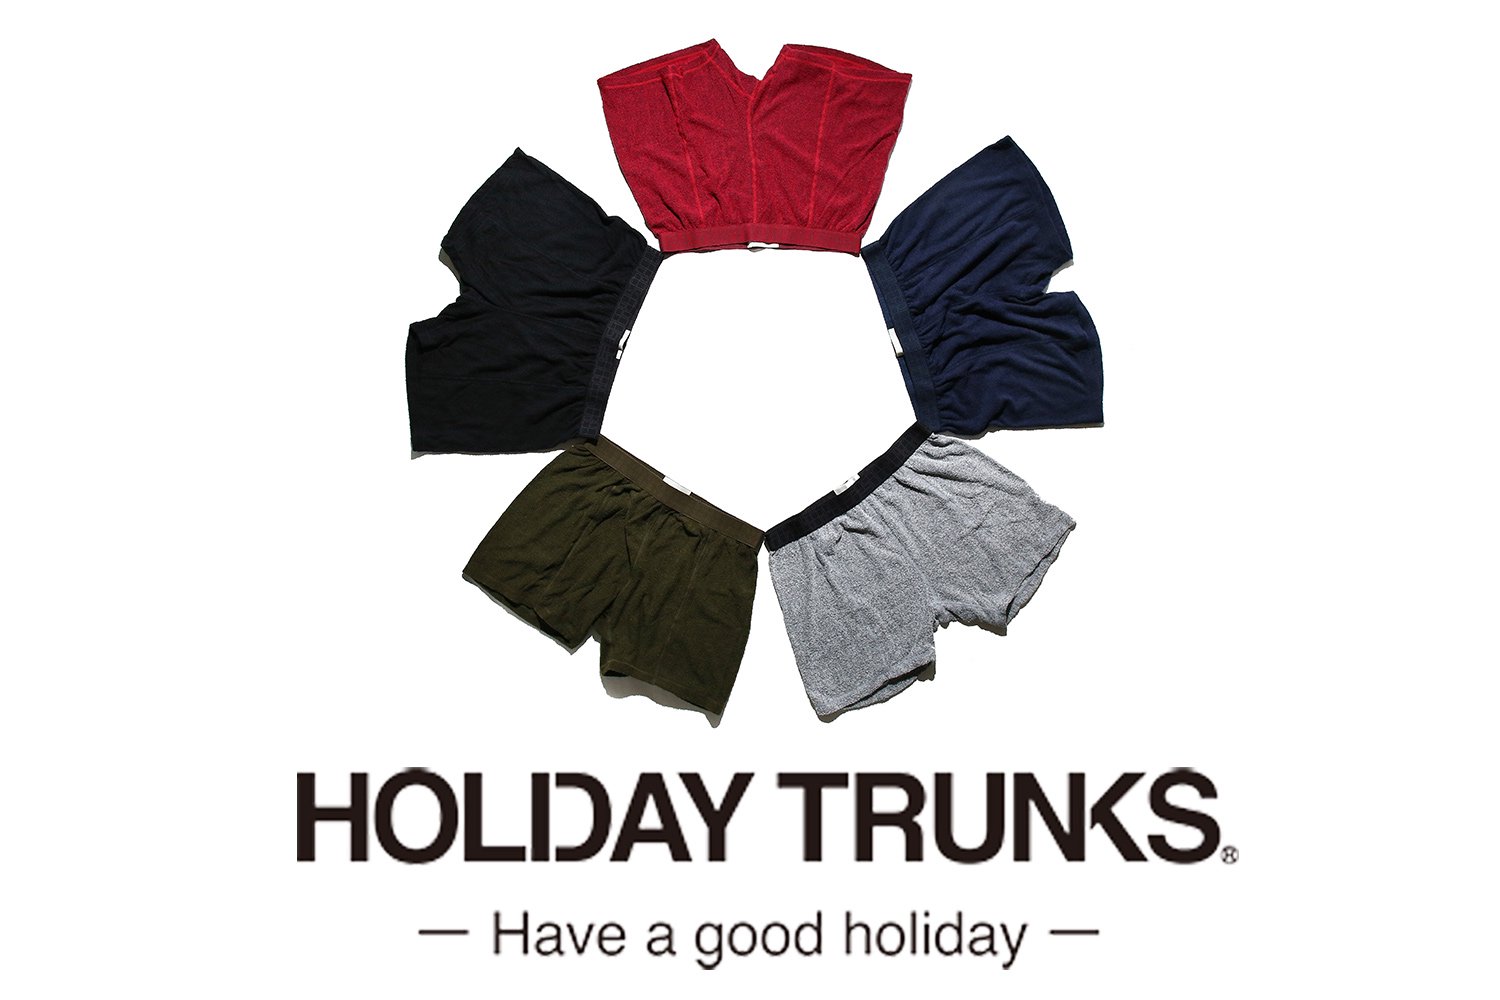 HOLIDAY TRUNKS